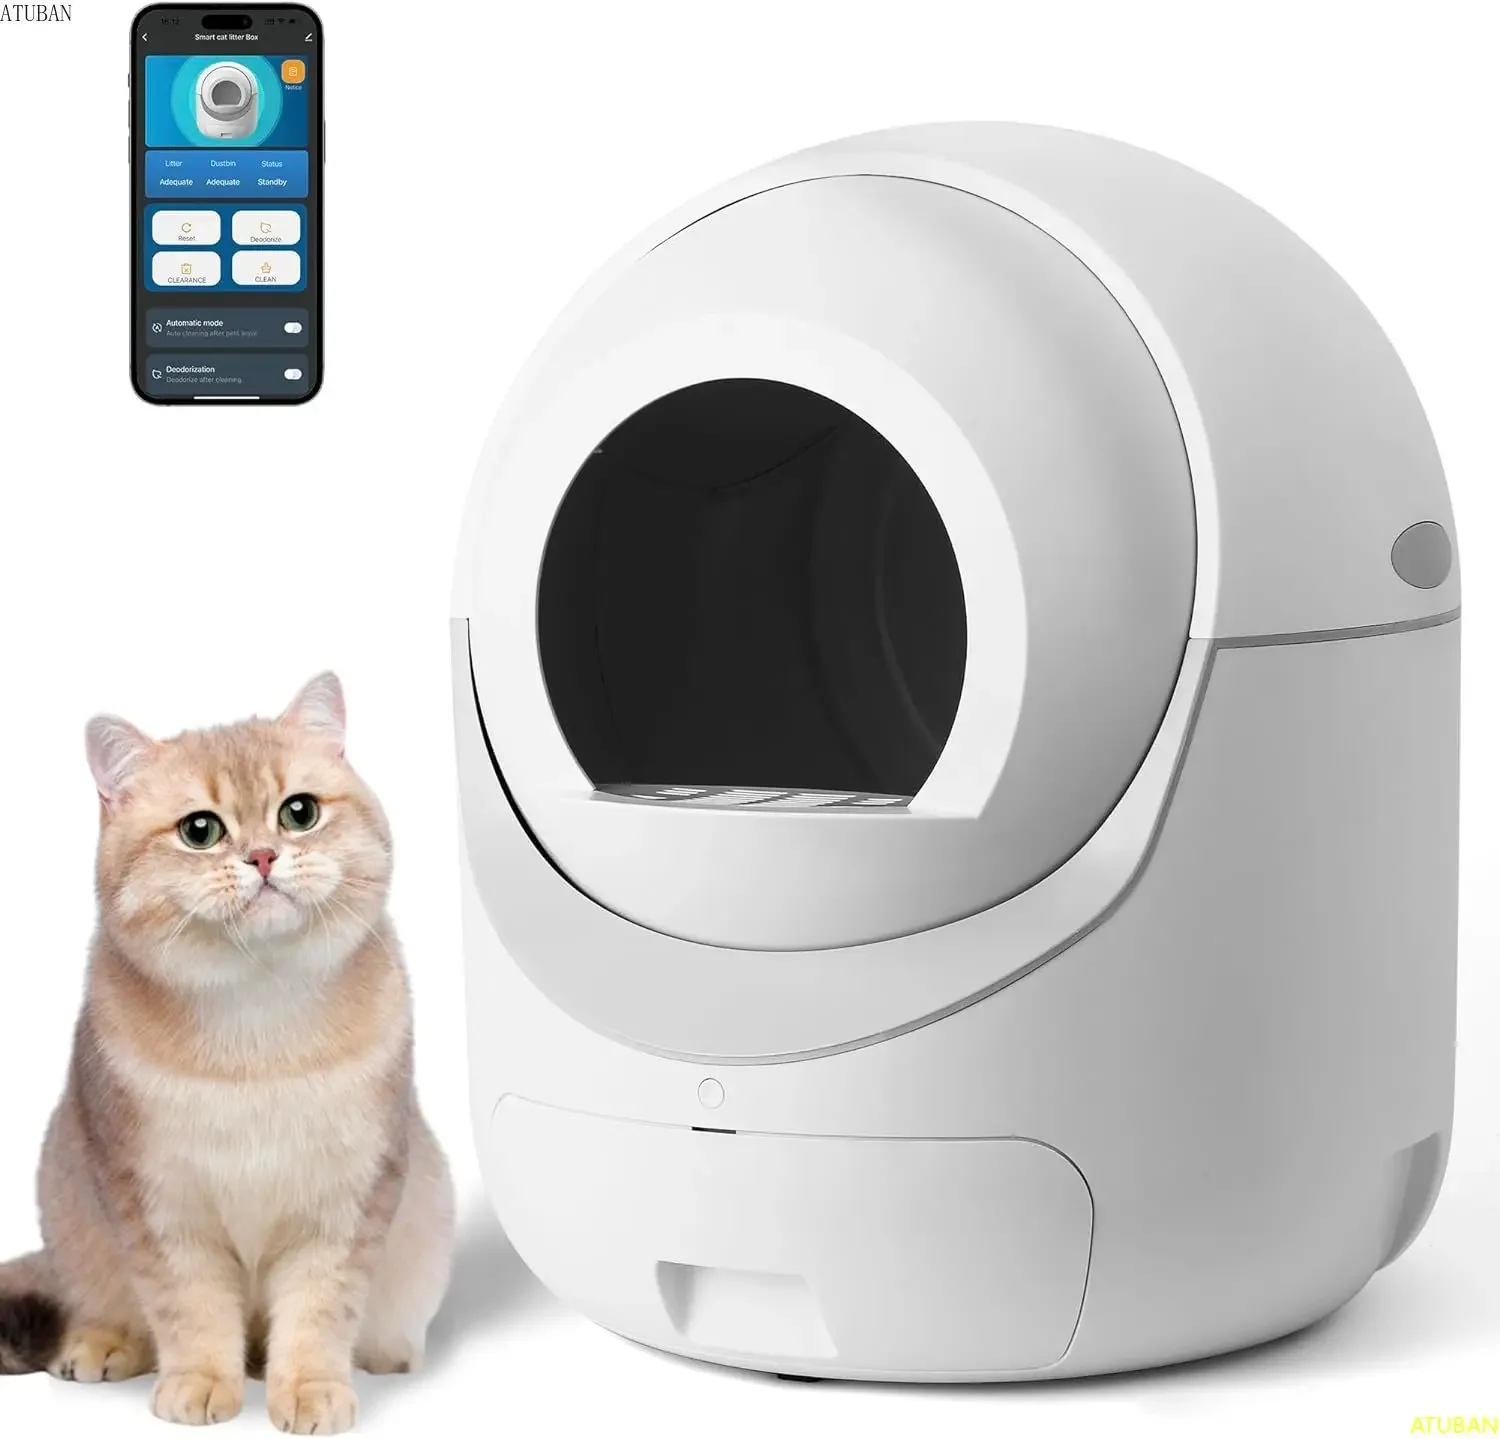 

Self Cleaning Litter Box-Automatic Cat Litter Box Self Cleaning for Multiple Cats,Anti-Pinch/Odor-Removal Design,All Litter Use